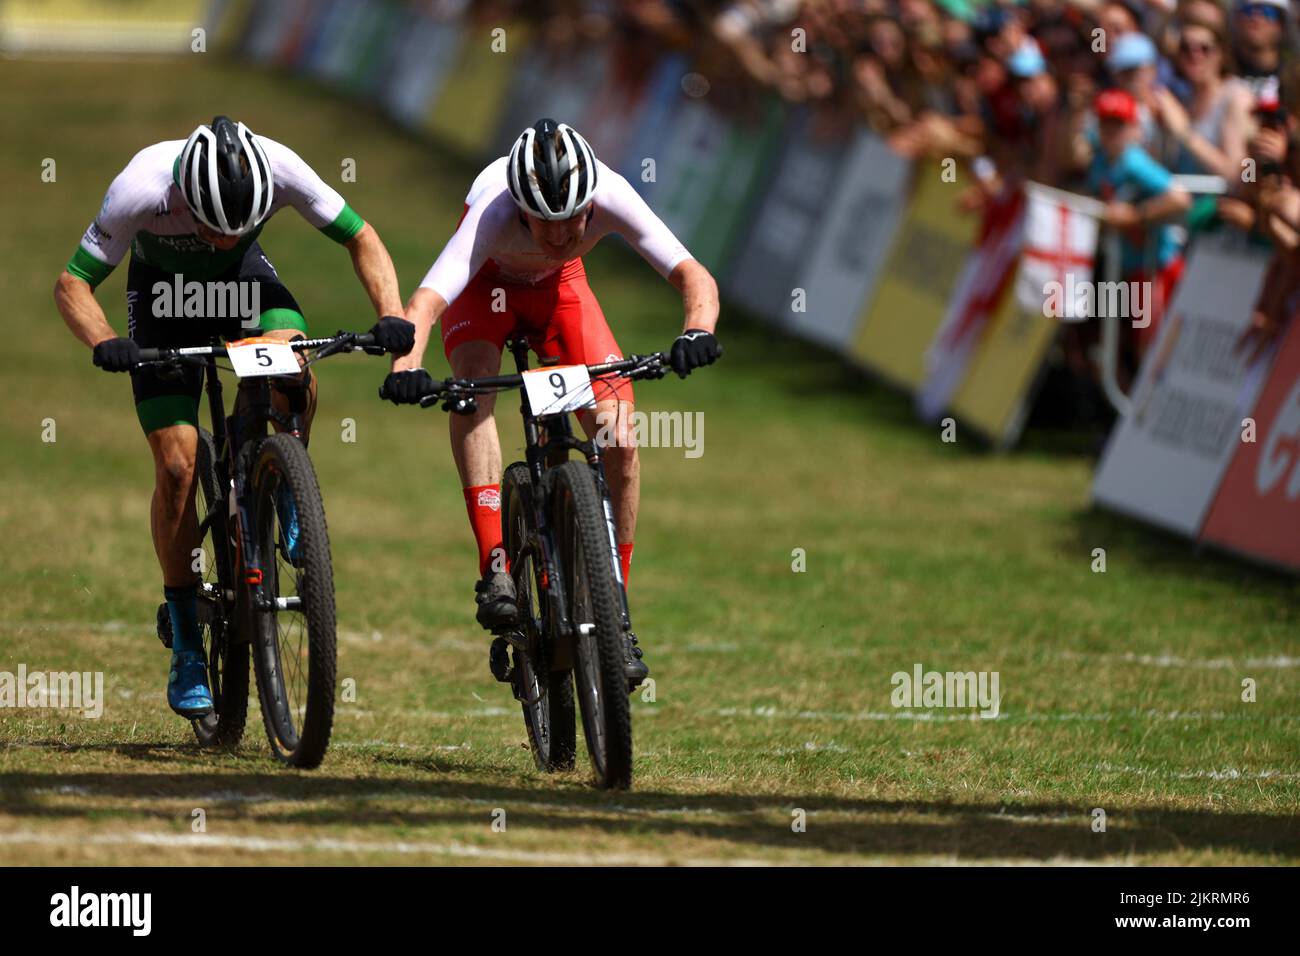 Commonwealth Games - Mountain Bike - Men's Cross-country - Final - Birches Valley, Rugeley, Birmingham, Britain - August 3, 2022 Northern Ireland's Cameron Orr and England's Jospeh Blackmore in action REUTERS/Hannah Mckay Stock Photo